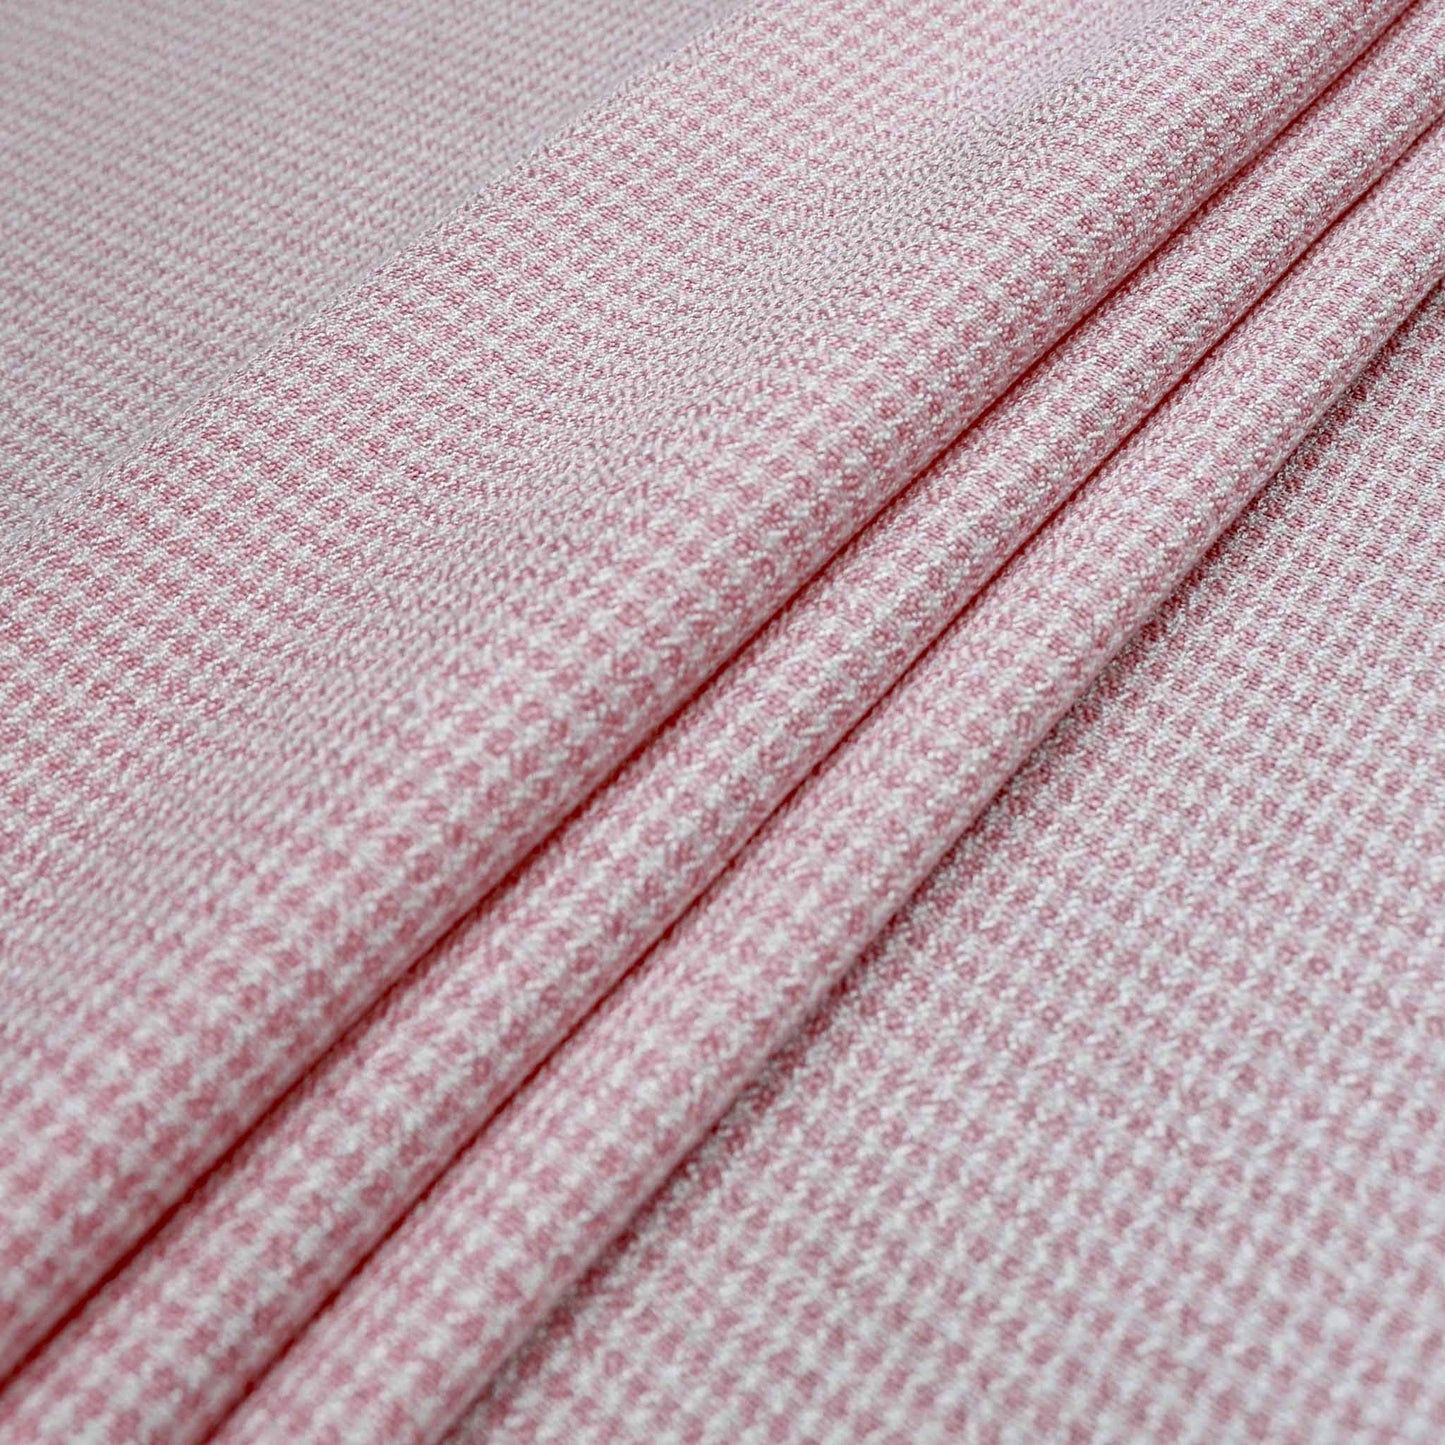 viscose crepe dressmaking fabric with small pink and white check pattern